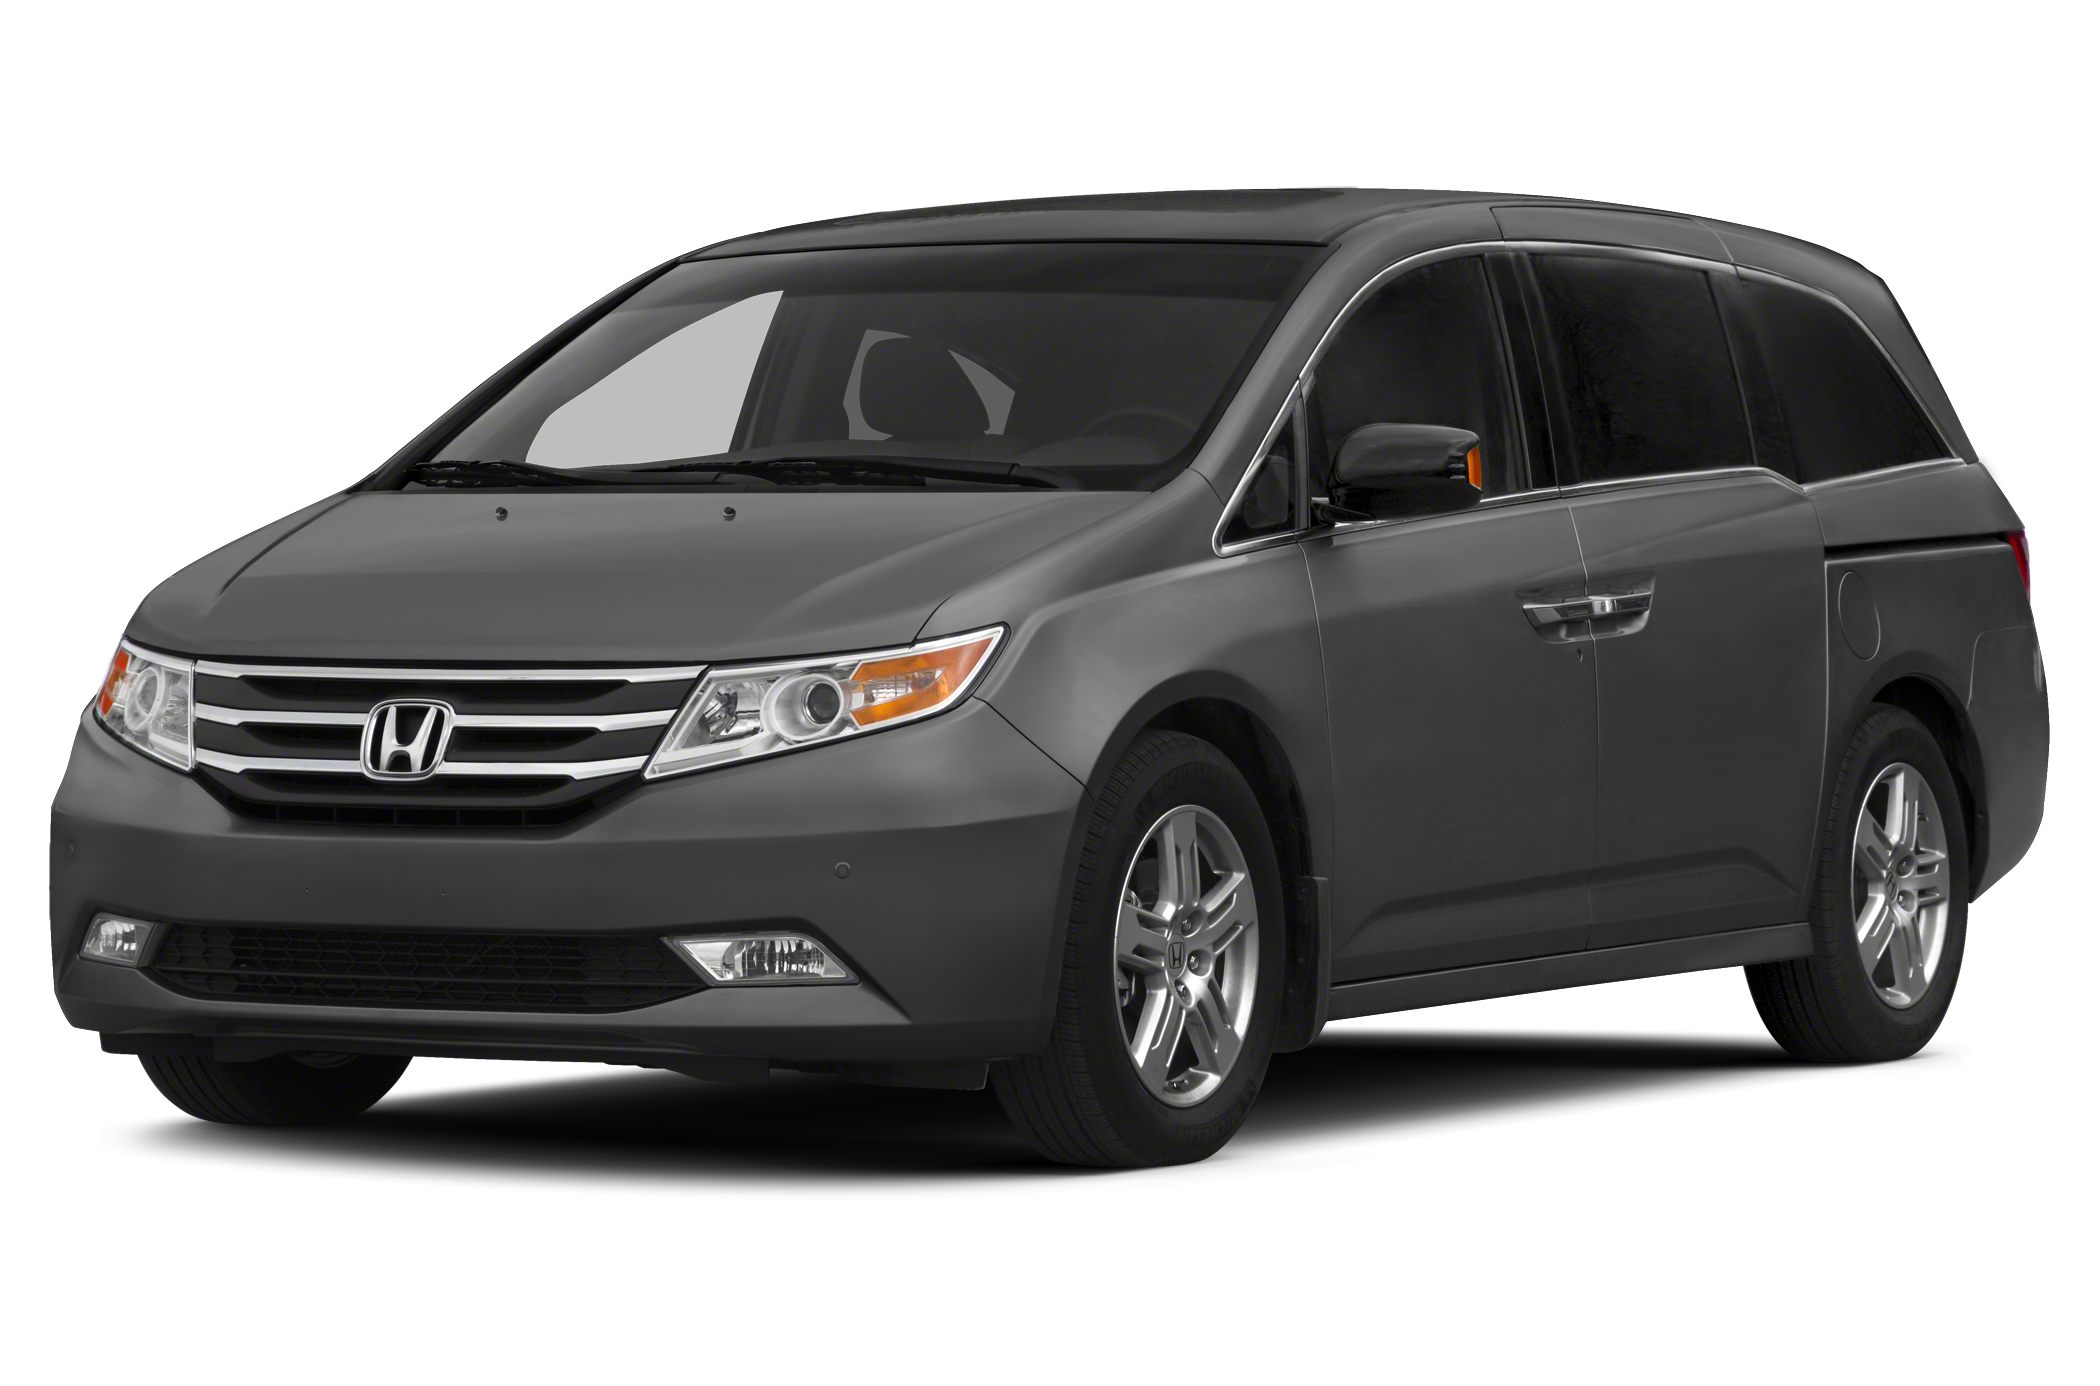 2013 Honda Odyssey Safety Features